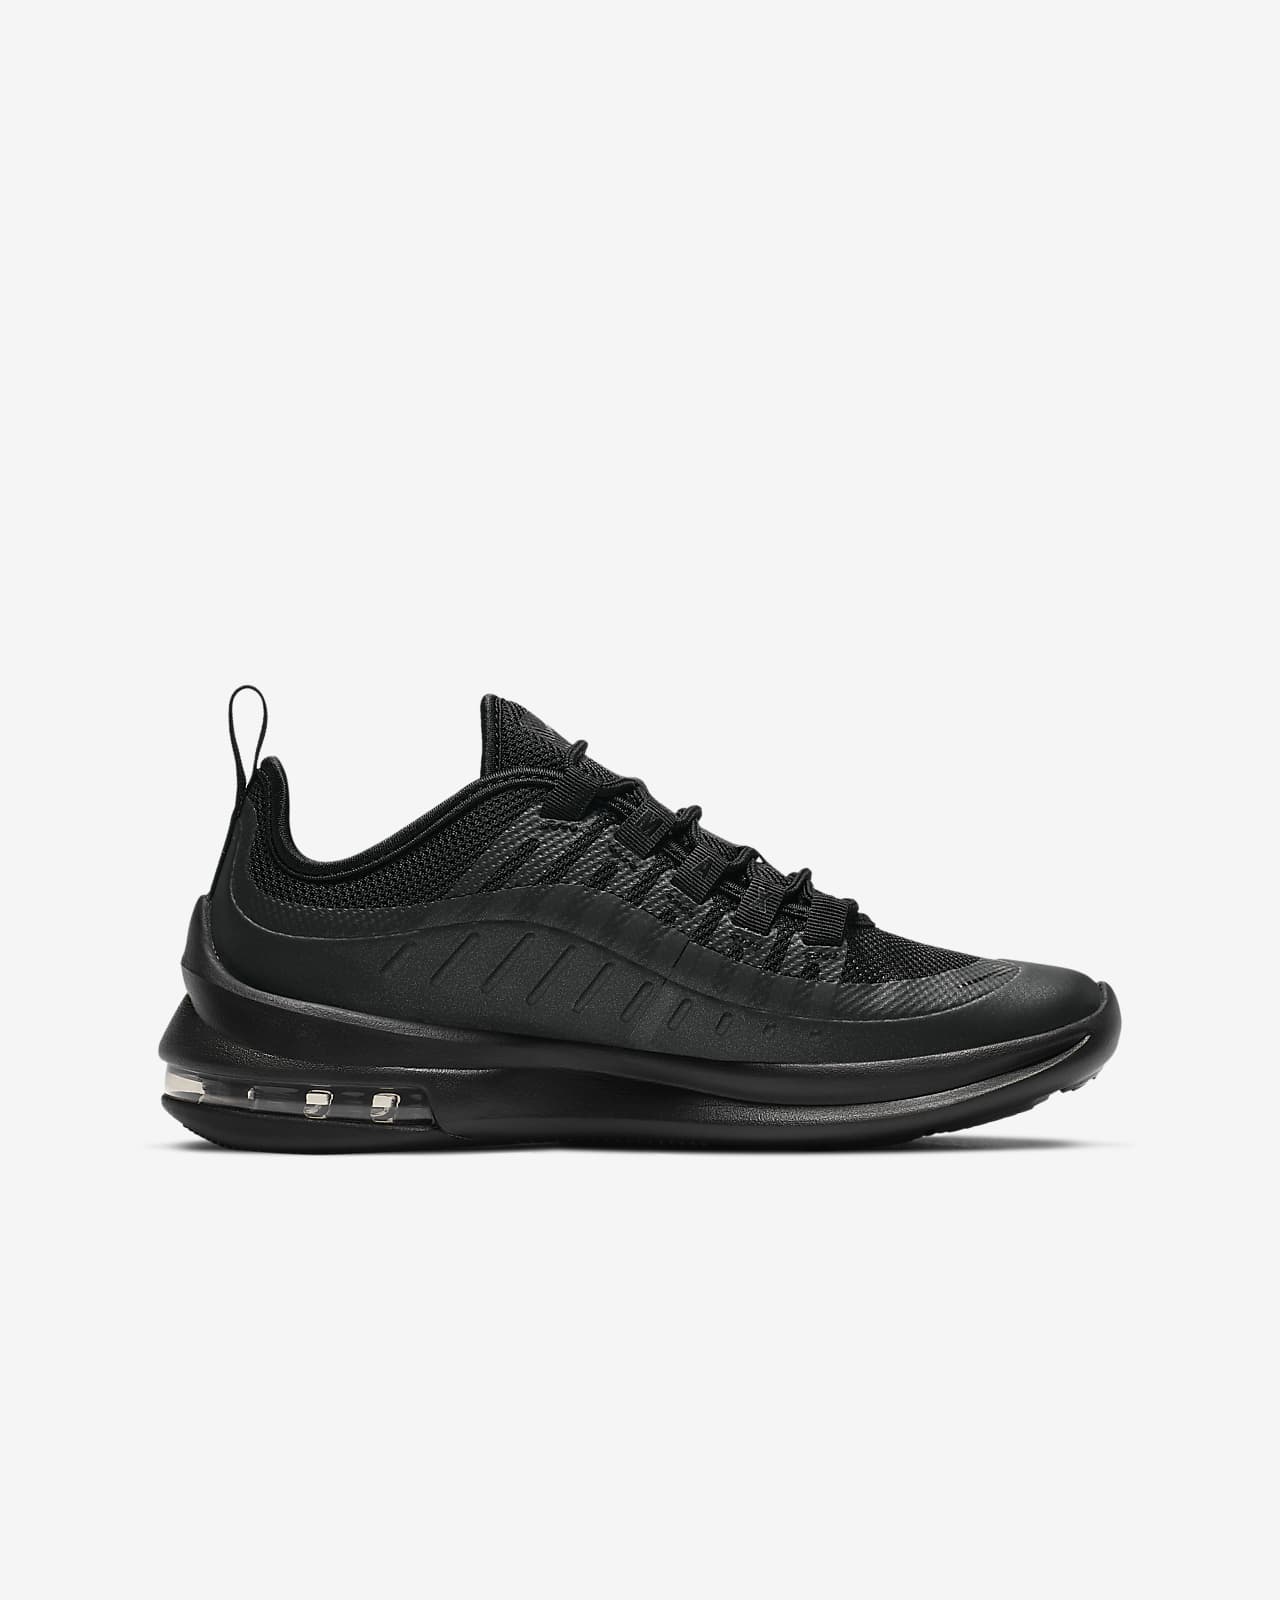 nike air max axis women's black and white